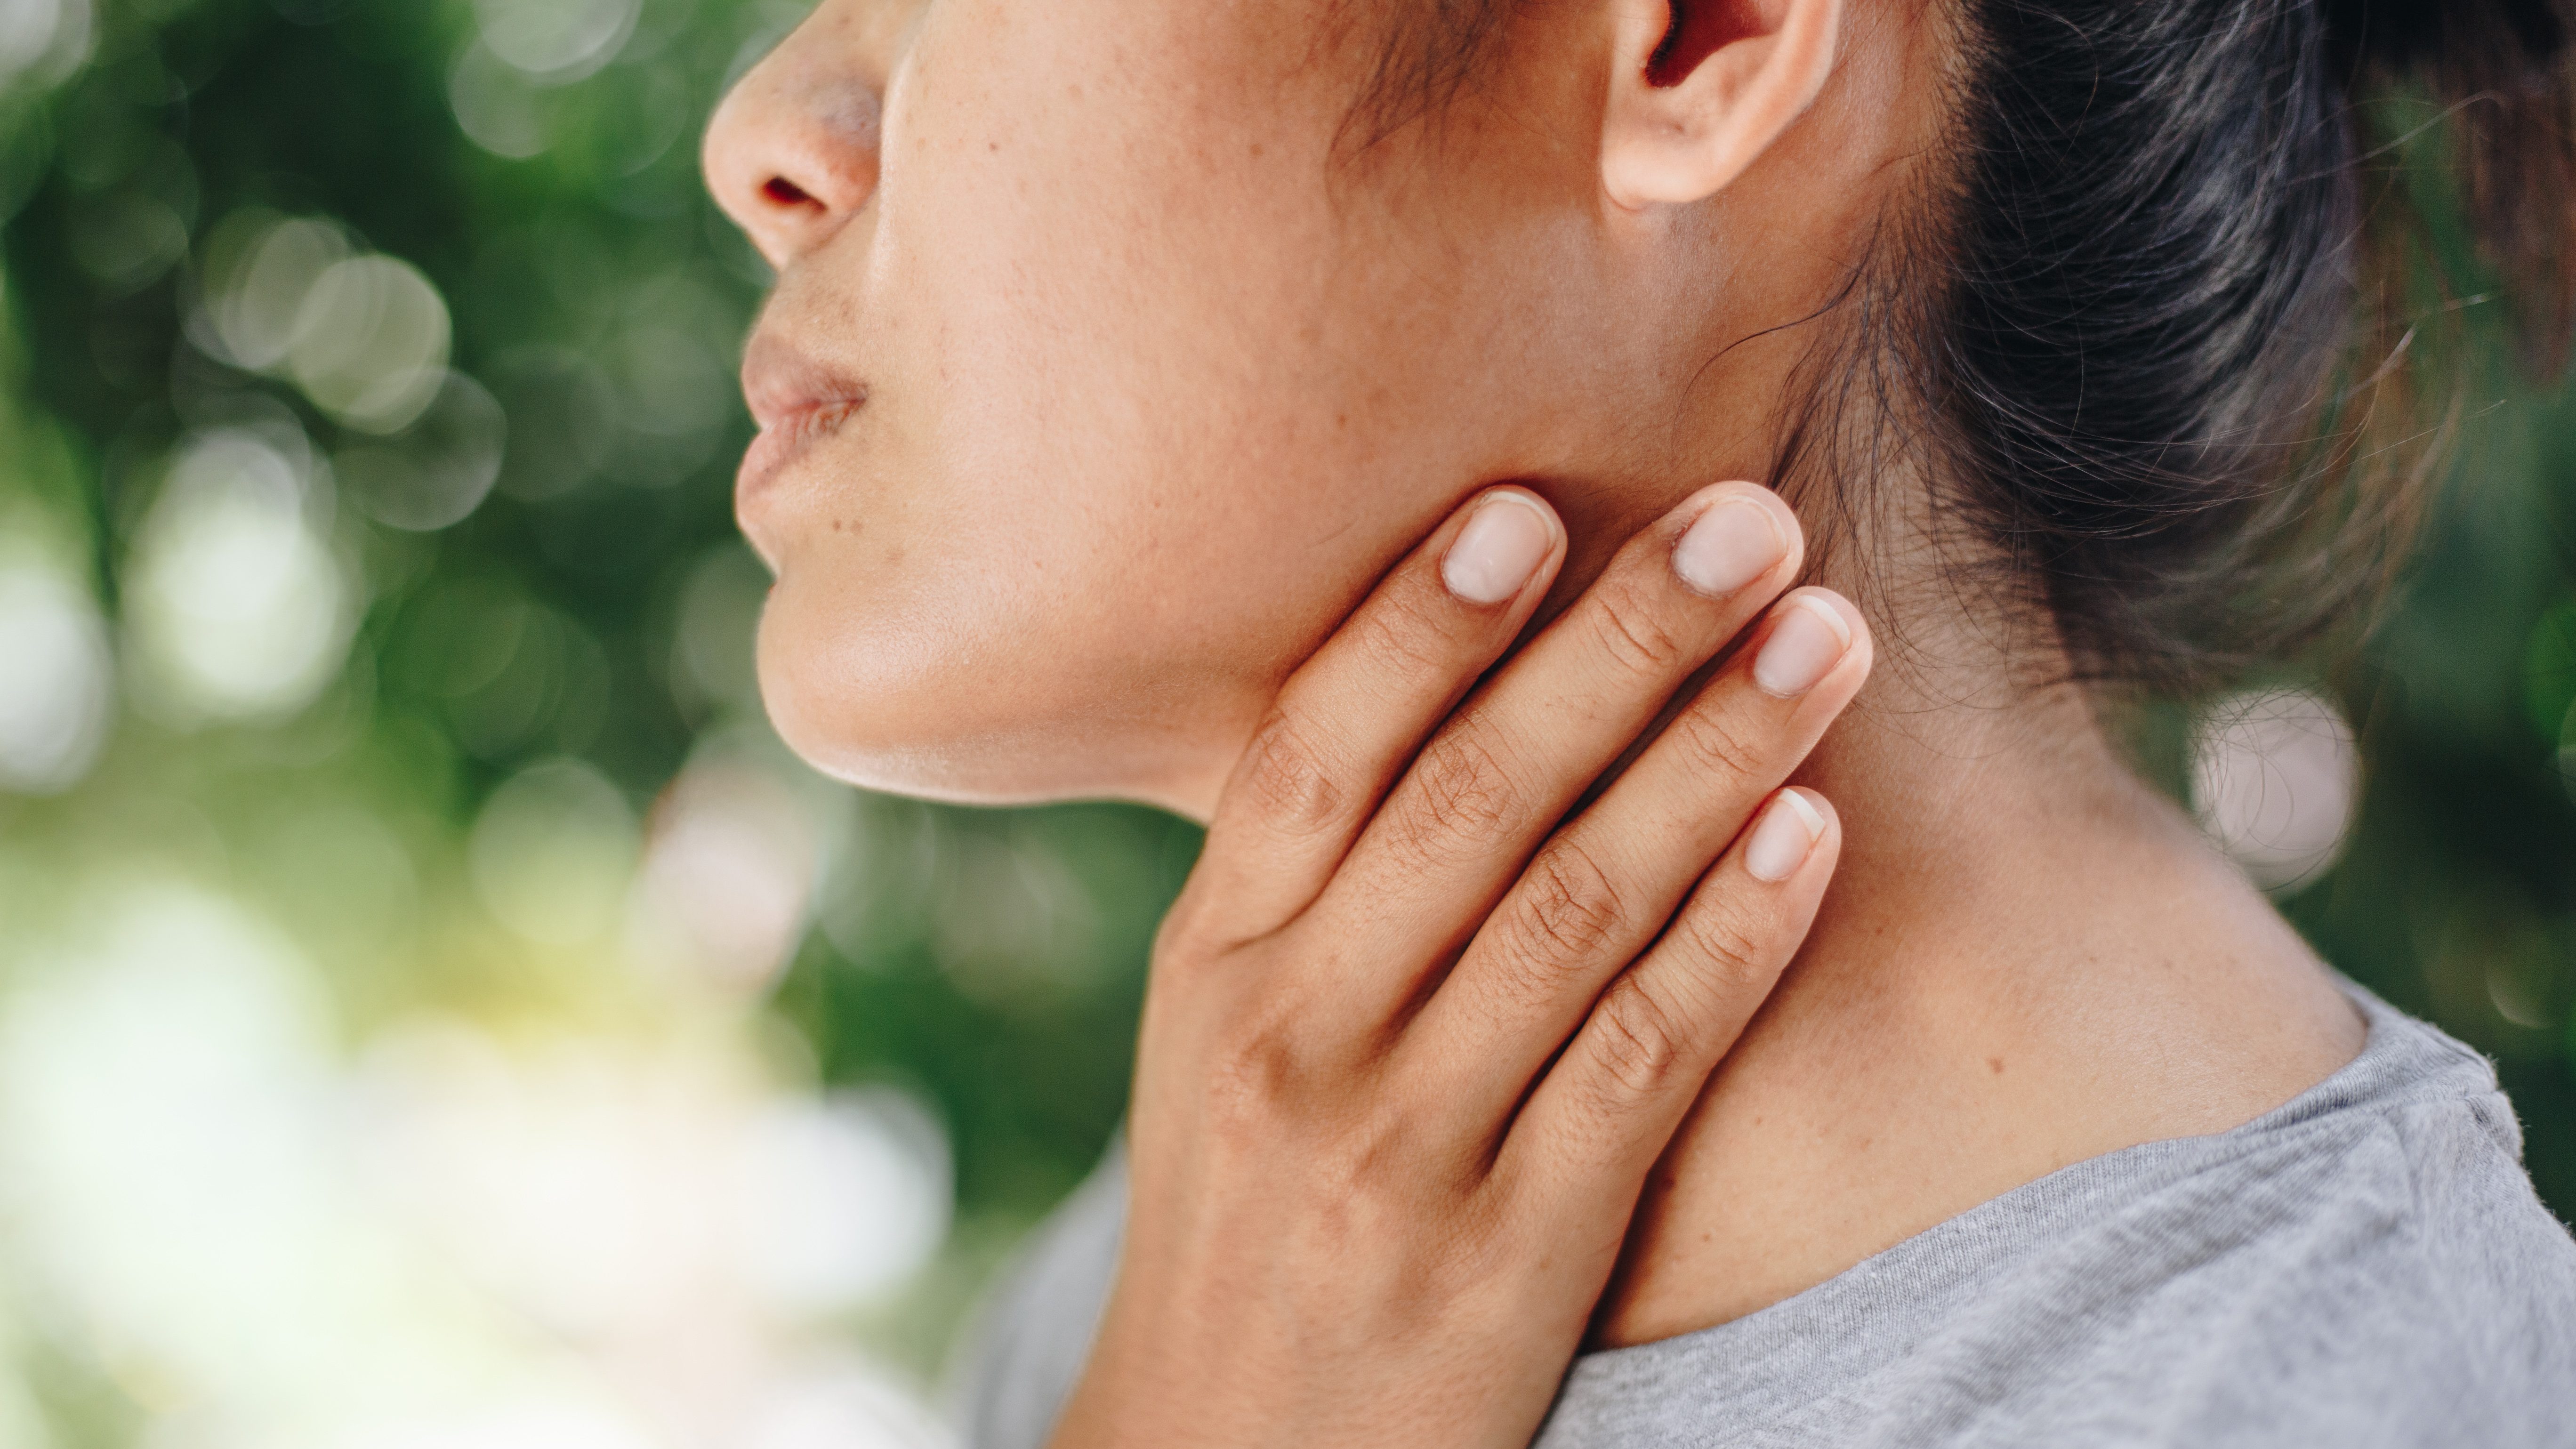 Hyperthyroidism vs. Hypothyroidism: What's the Difference?